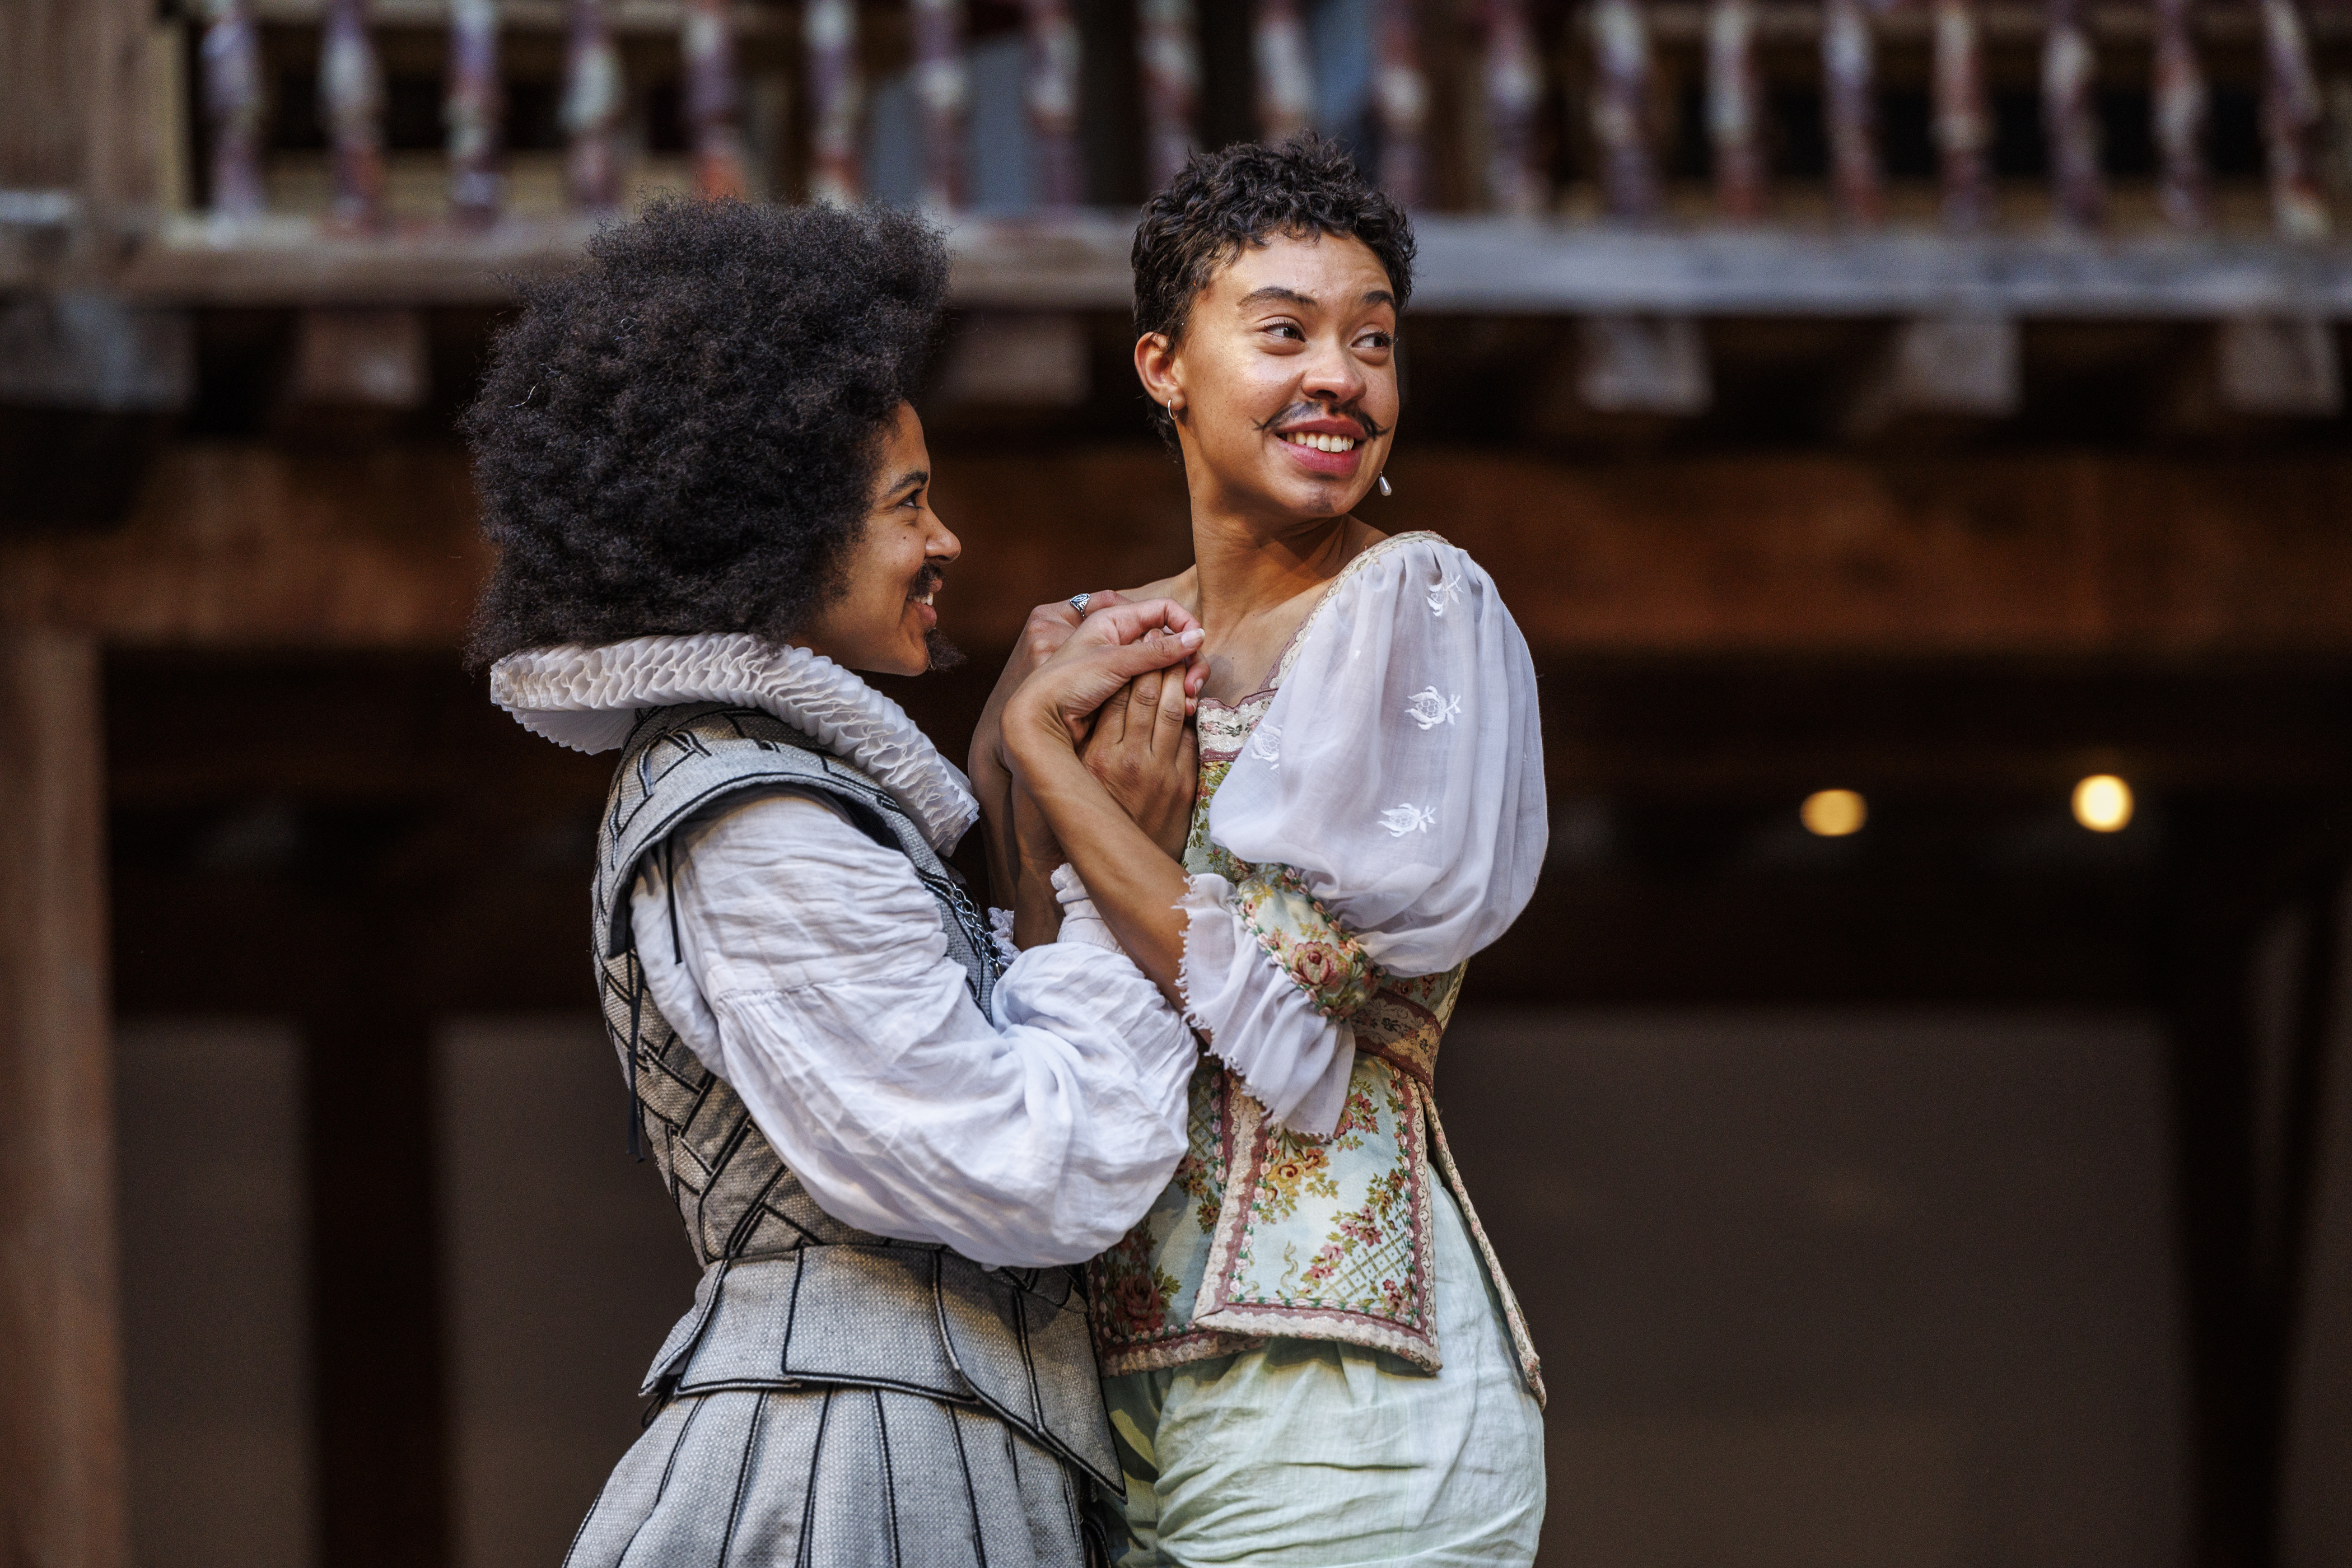 Actors Isabel Adomakoh Young and Nina Bowers embrace, as Orlando and Rosalind, in a scene from As You Like It at Shakespeare's Globe